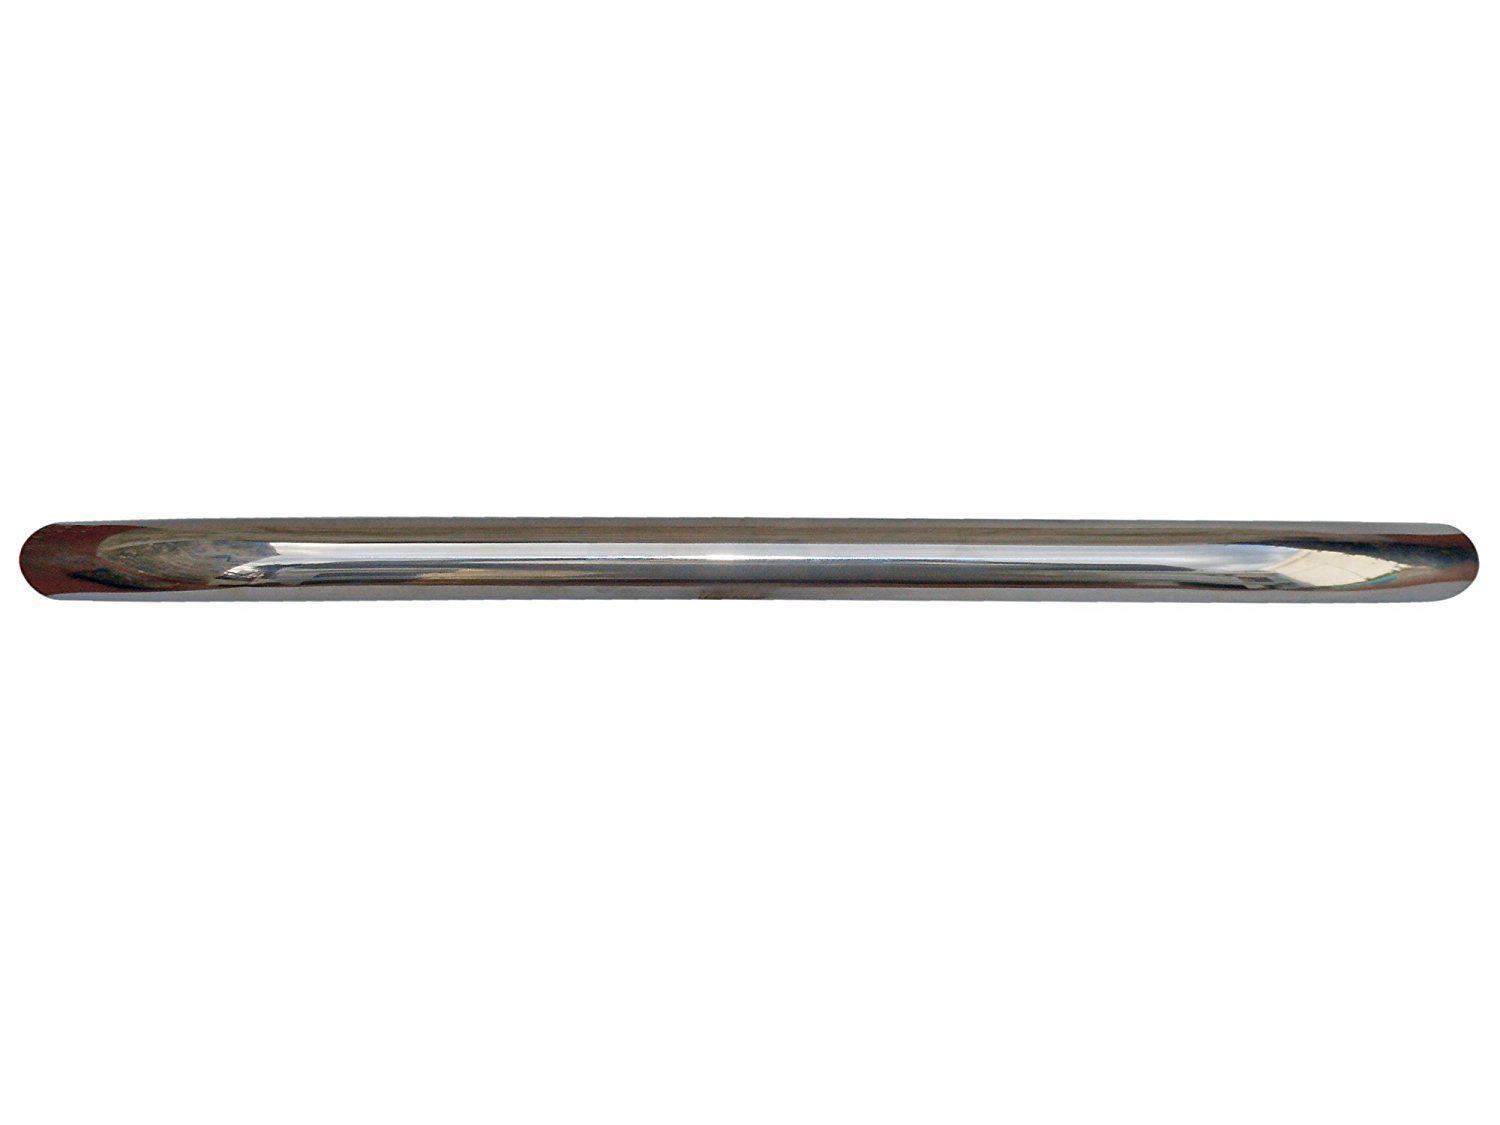 Stainless Steel 18" Handrail/Grab Handle w/Studs for Boats-Canadian Marine &amp; Outdoor Equipment